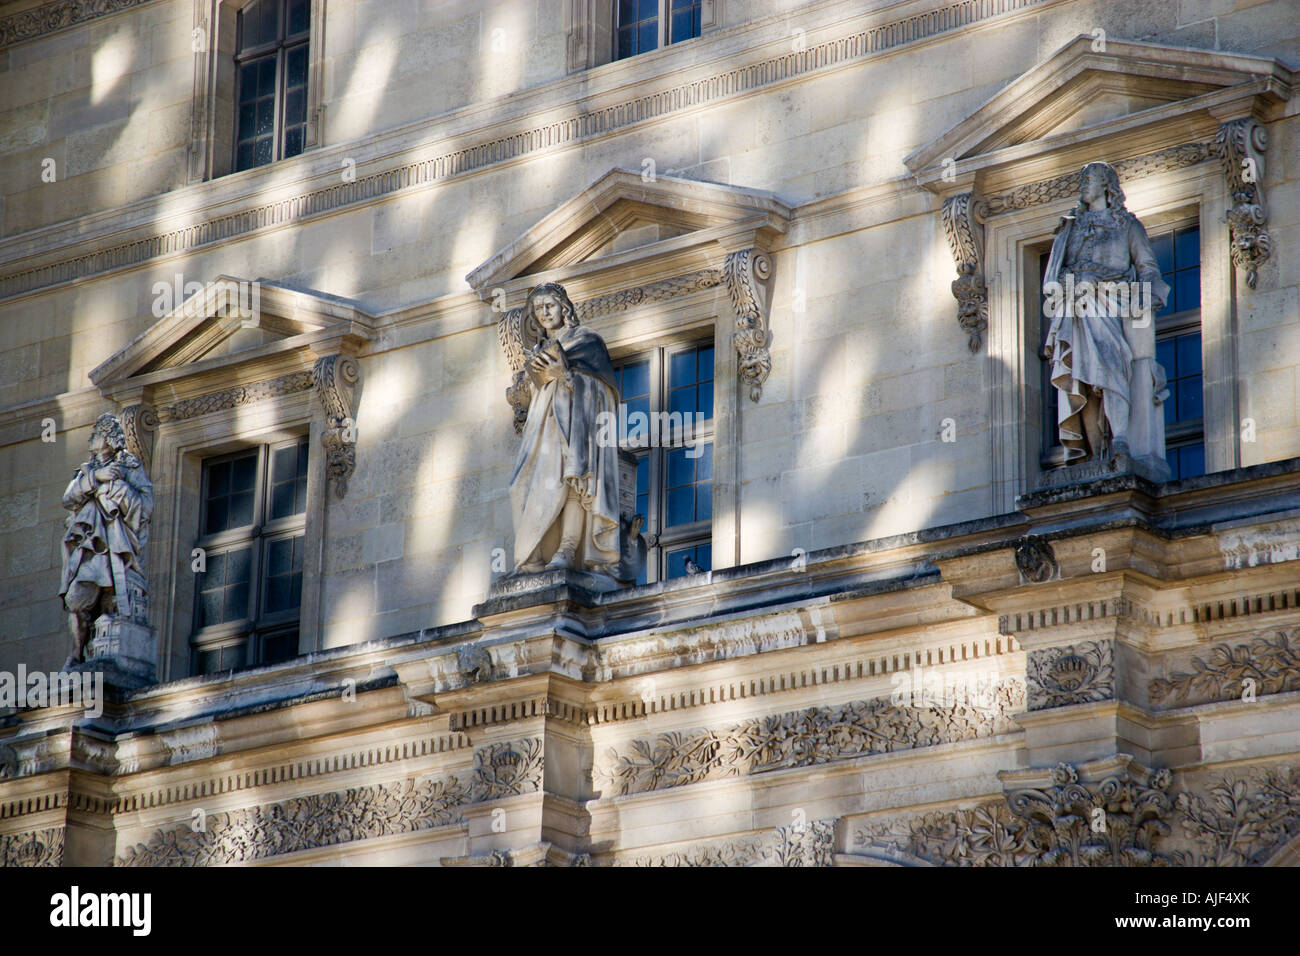 France Ile De France Paris Statues On A Balcony Of Denon Wing Of Musee Du Louvre Museum Art Gallery Stock Photo